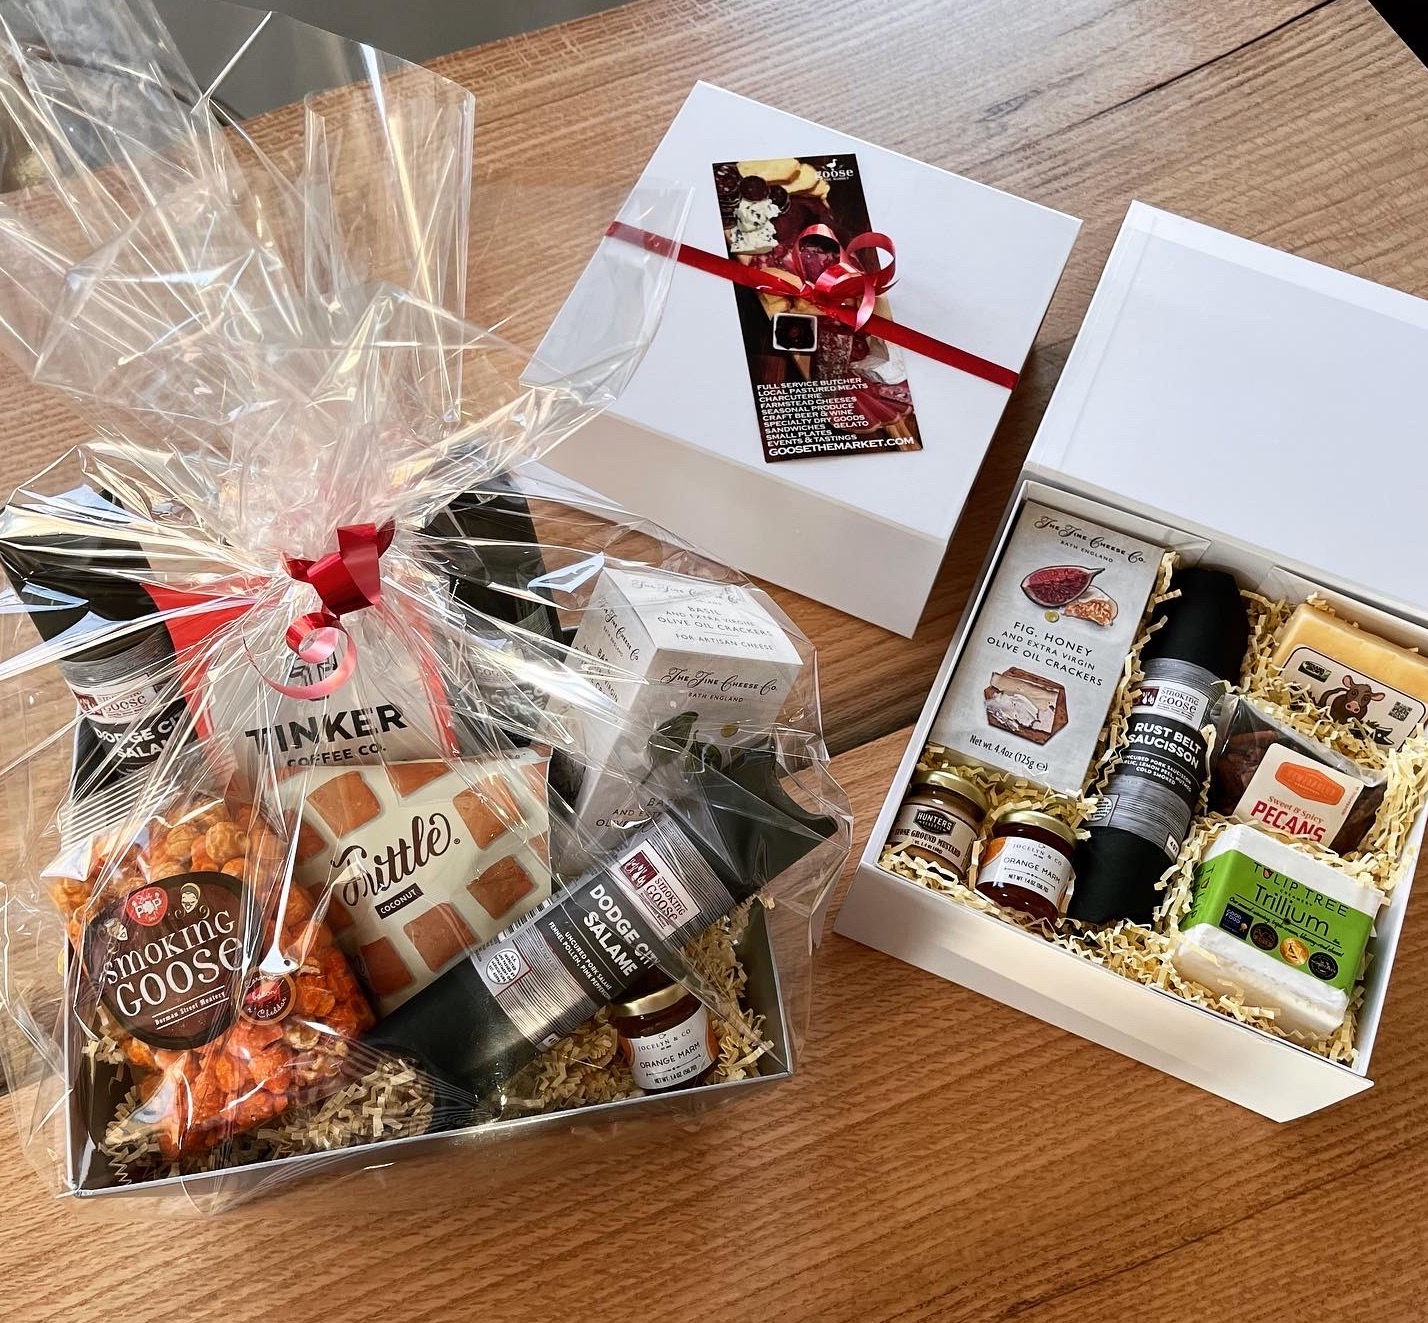 A photo of a gift basket that has different foods and spices